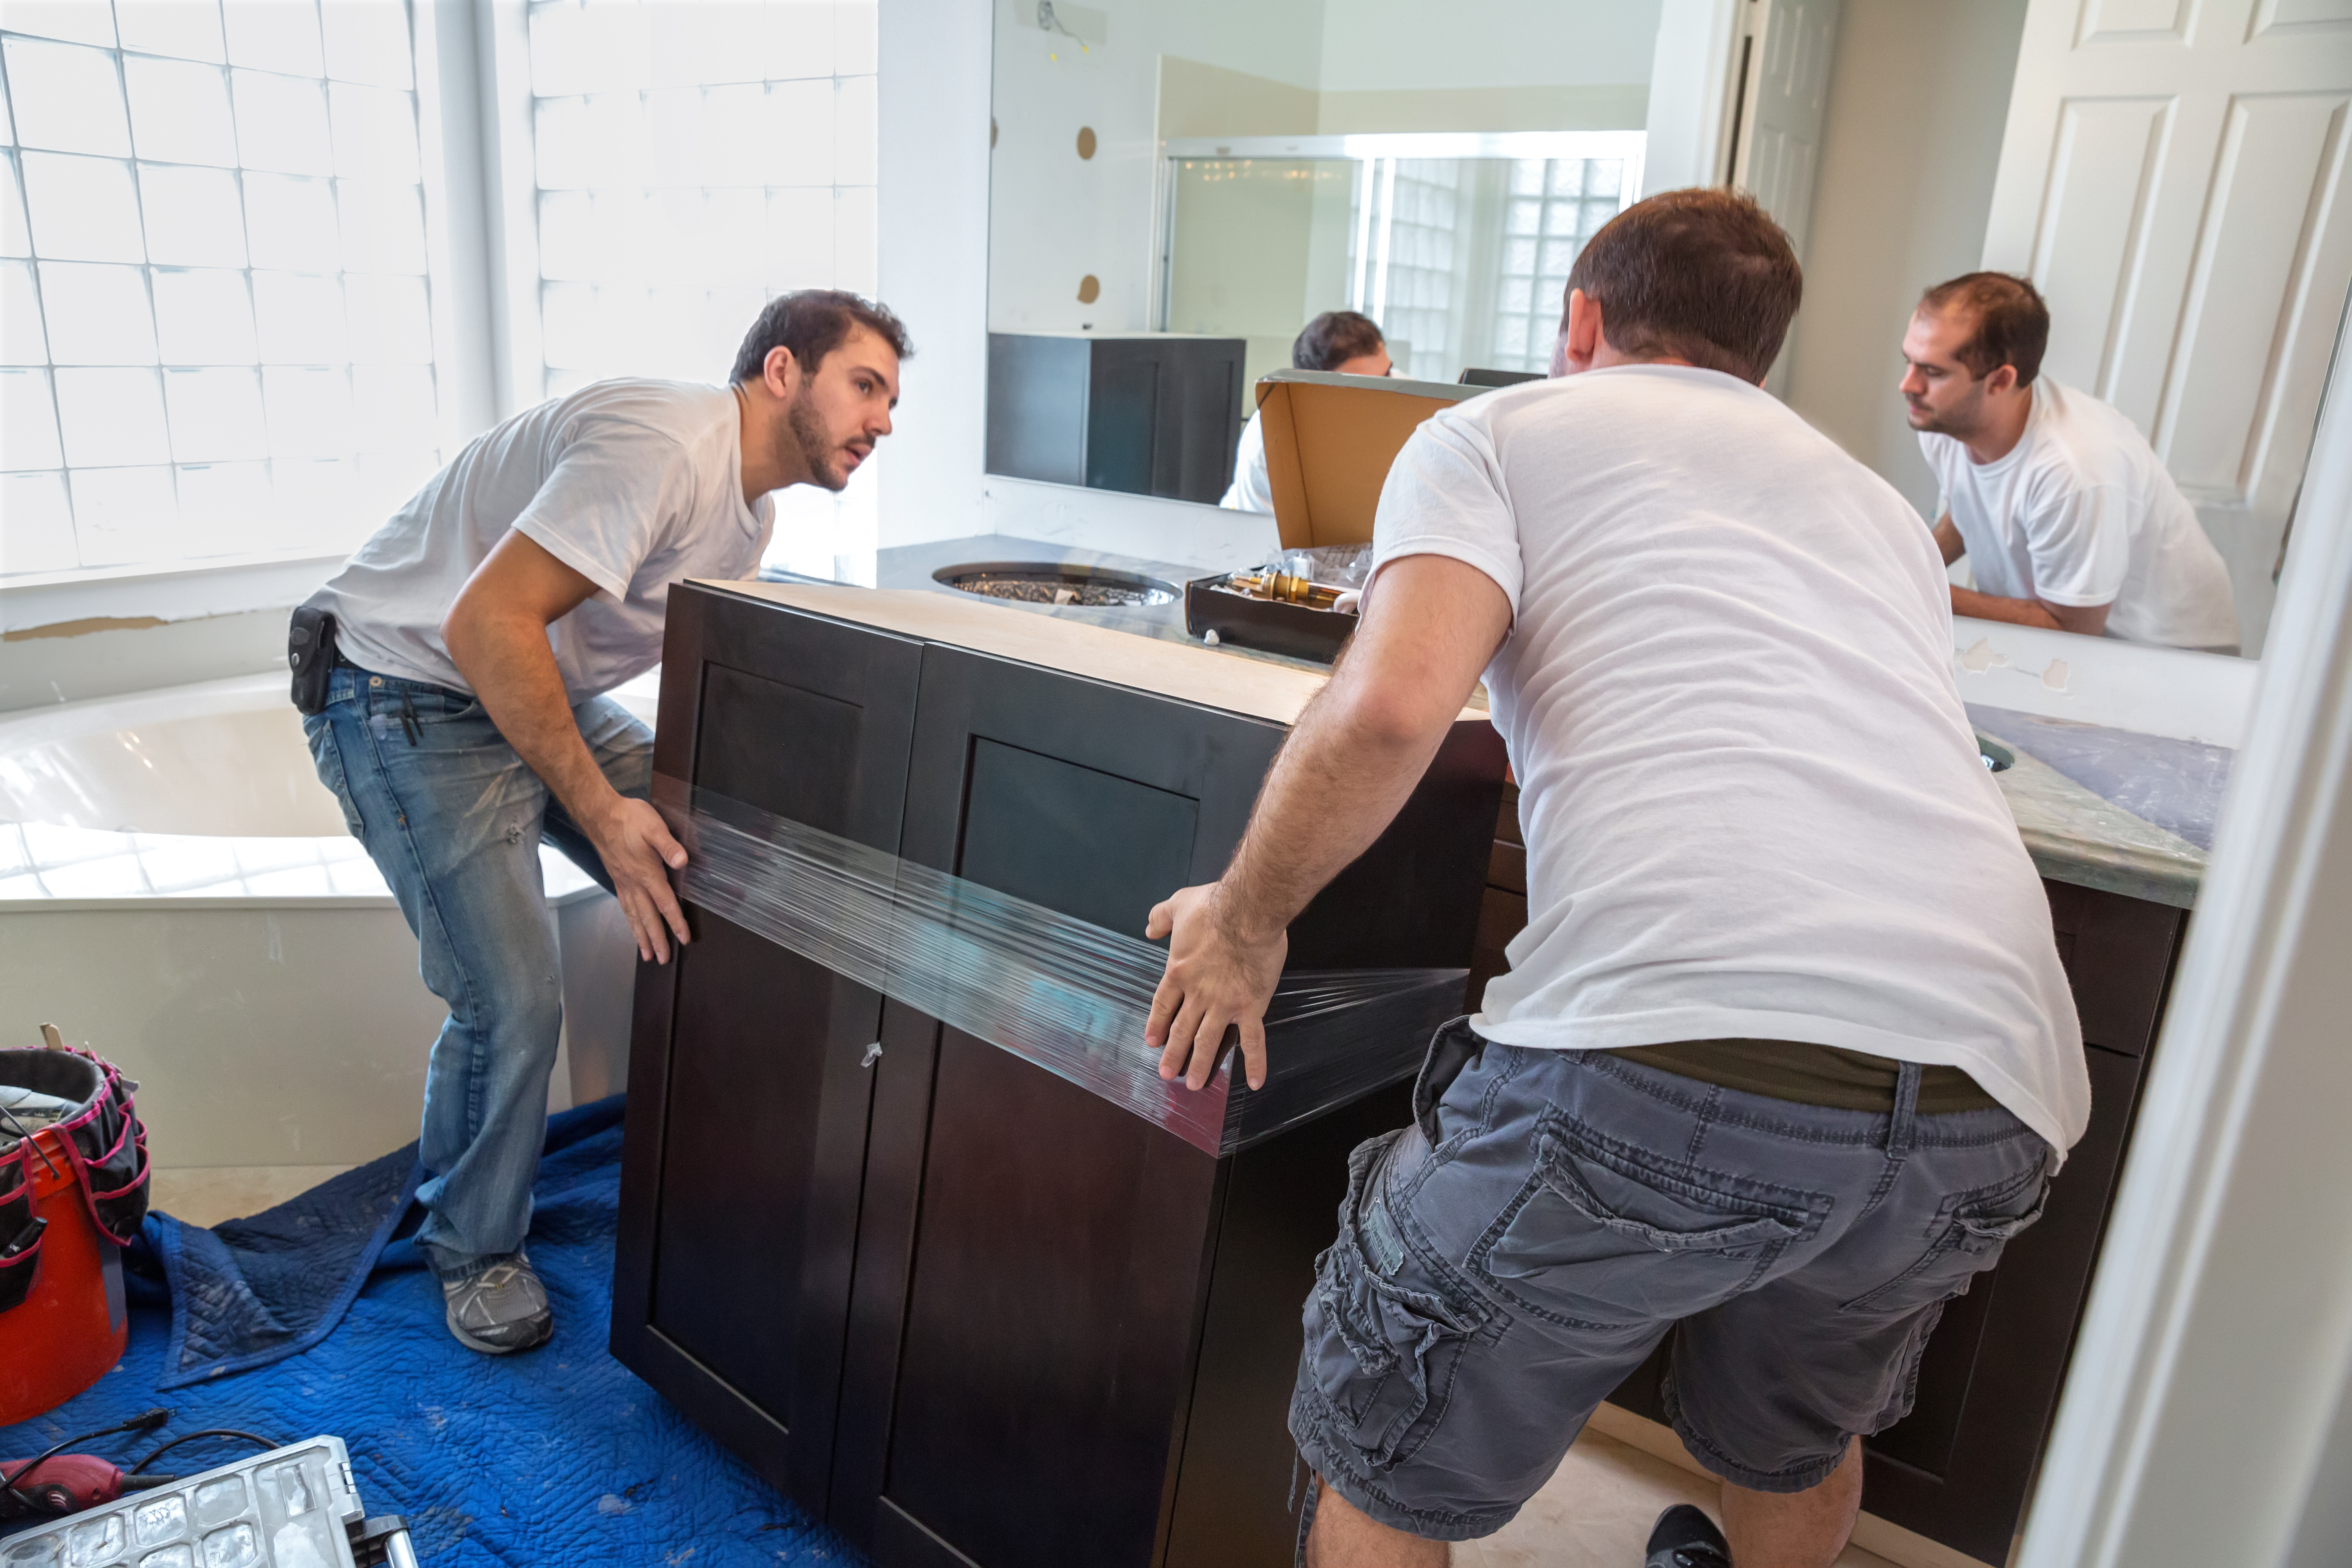 Two men doing major remodeling to a bathroom | Source: Getty Images